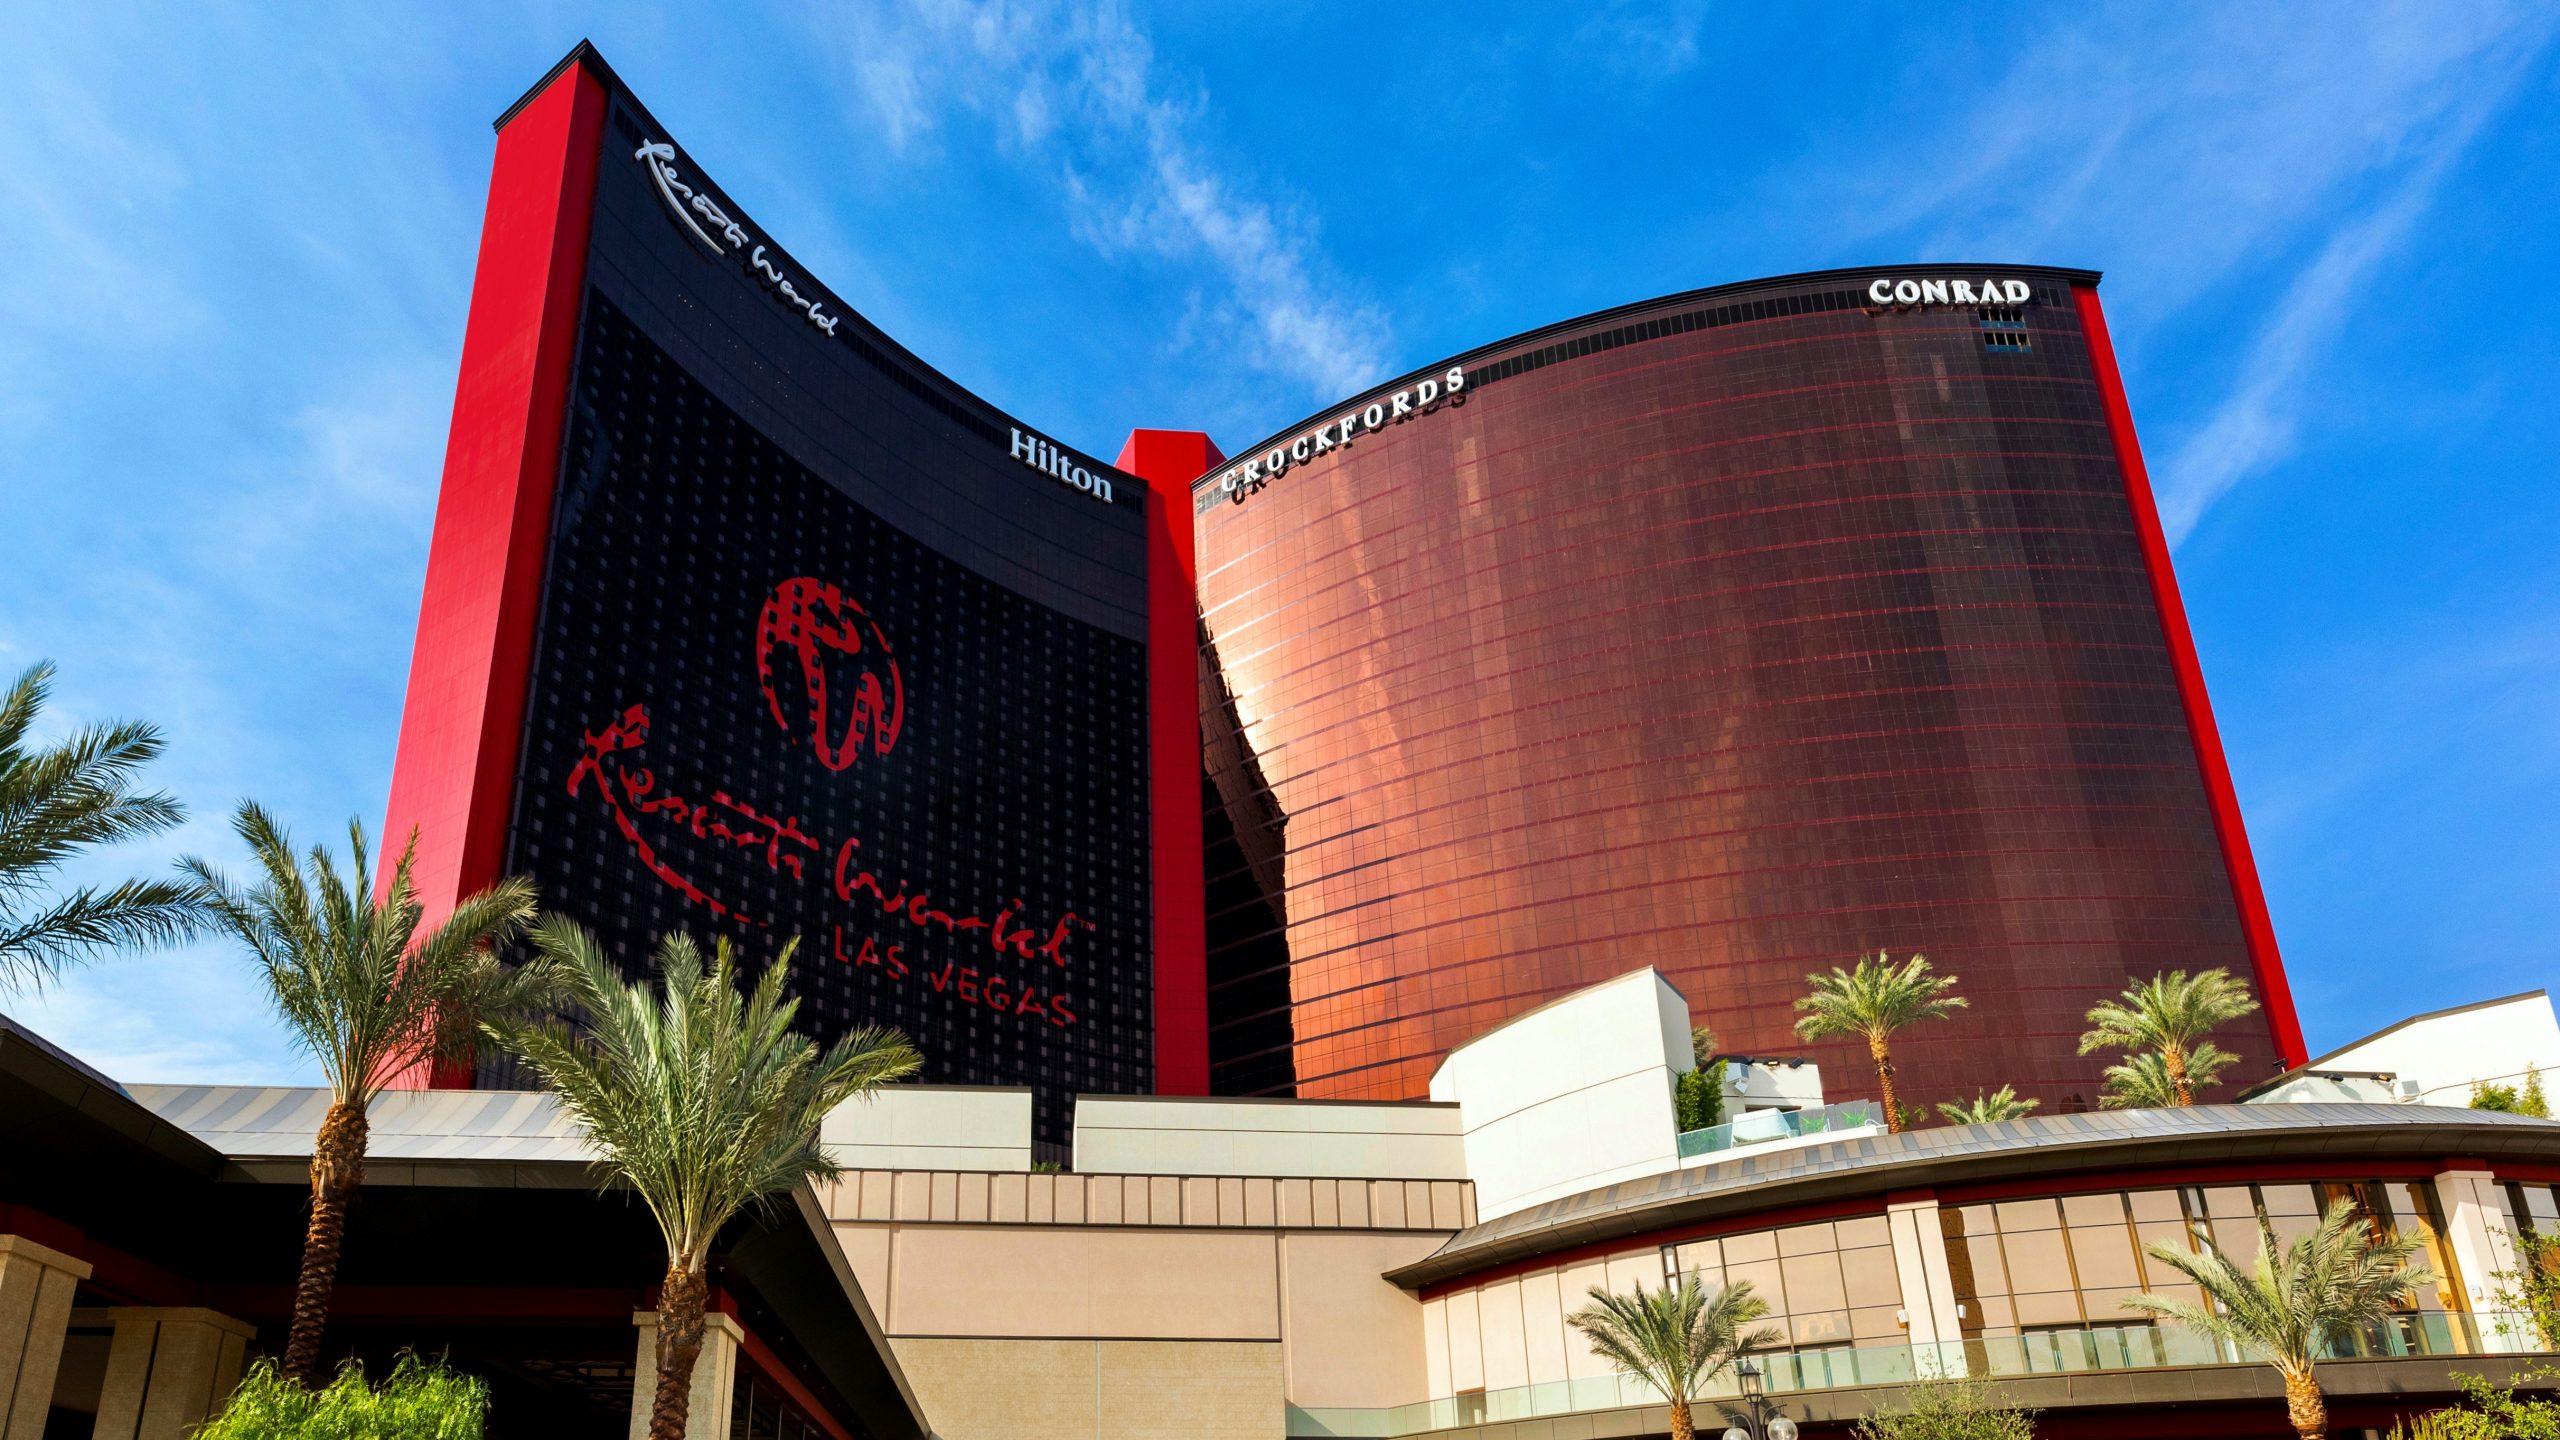 Resorts World Officially Debuts In Las Vegas, the First Resort Built on